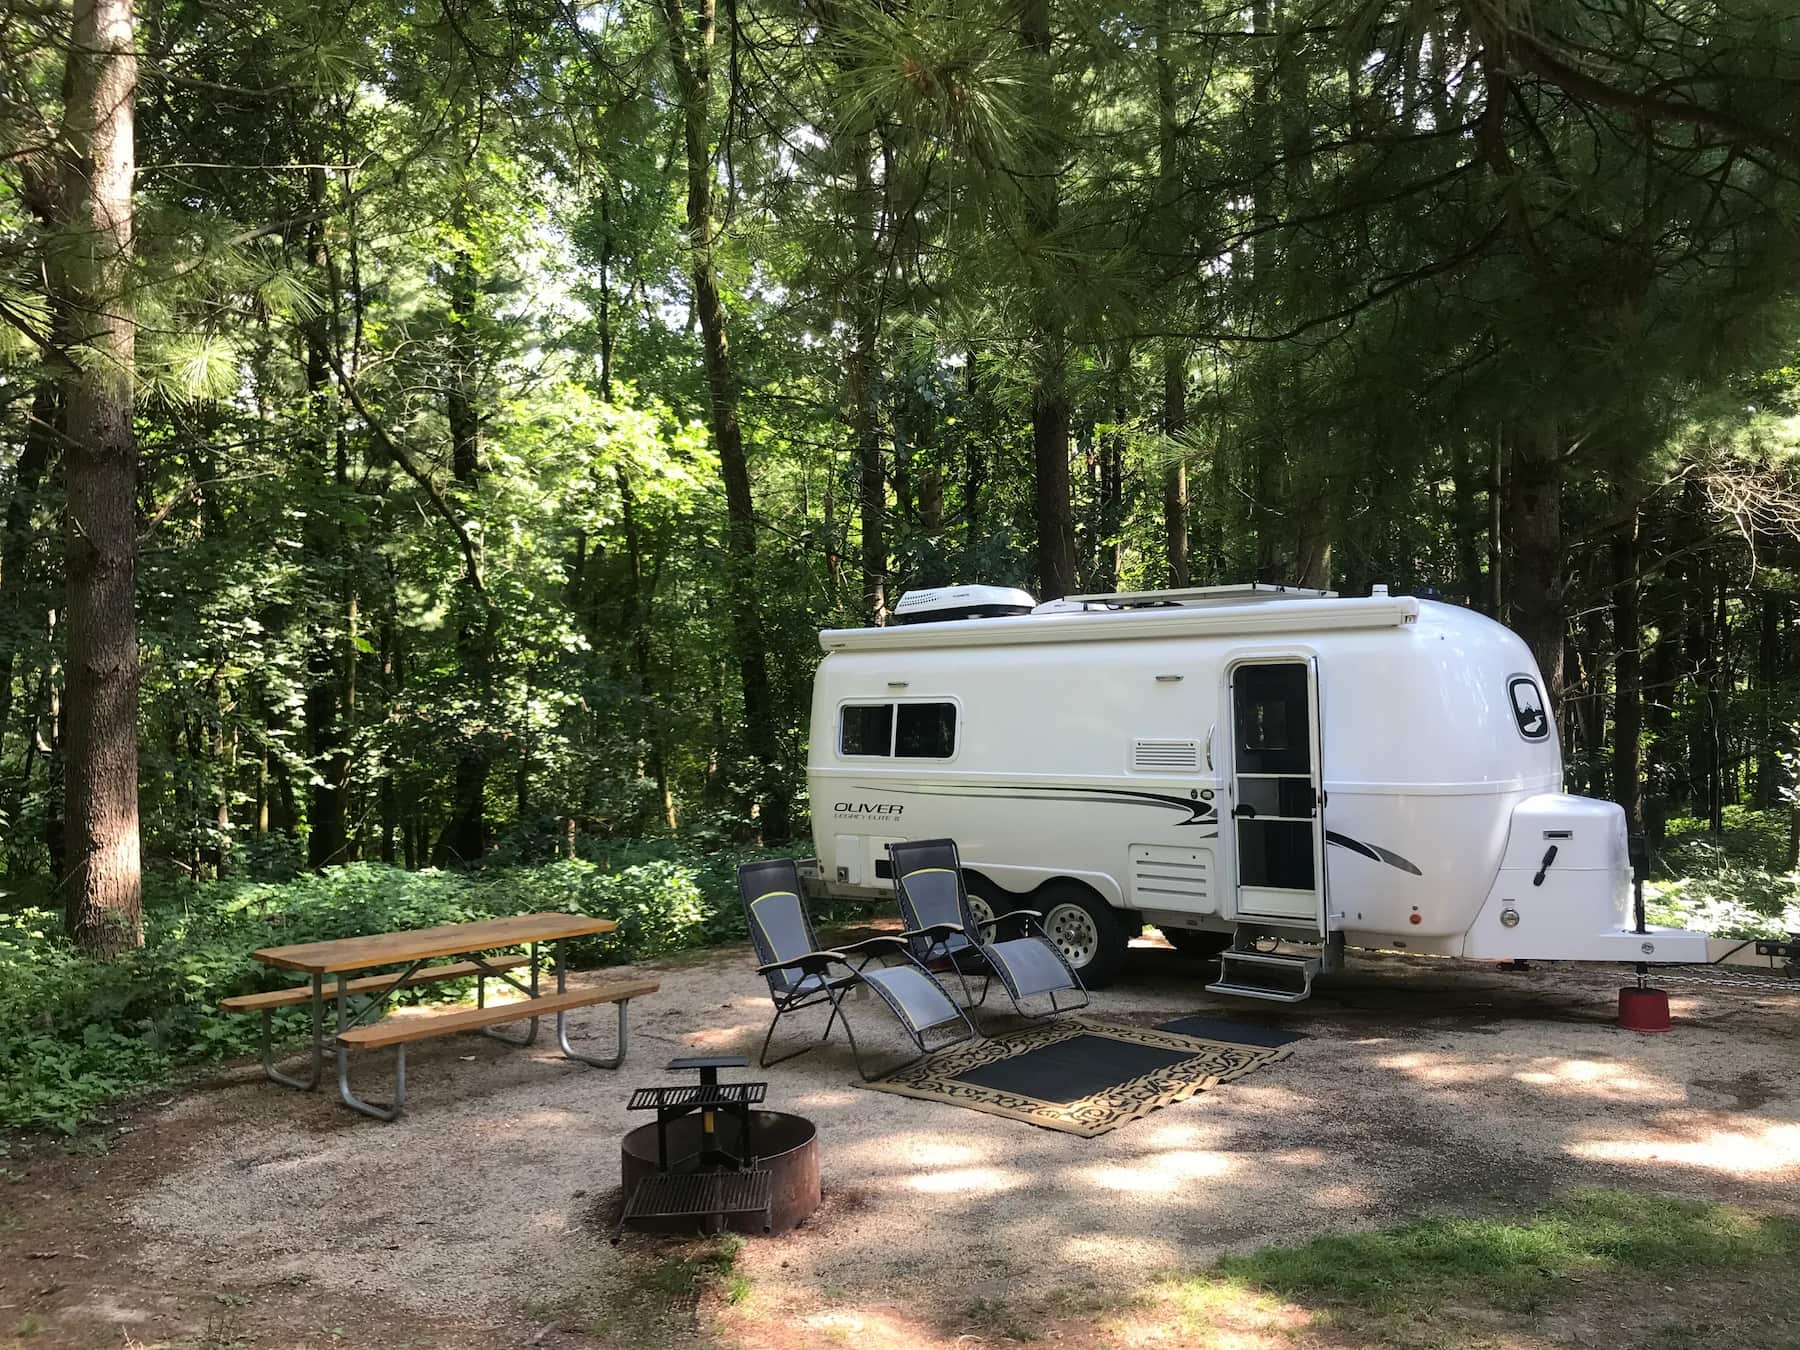 White trailer parked at a campsite beside camp chairs next to a picnic table in the forest.